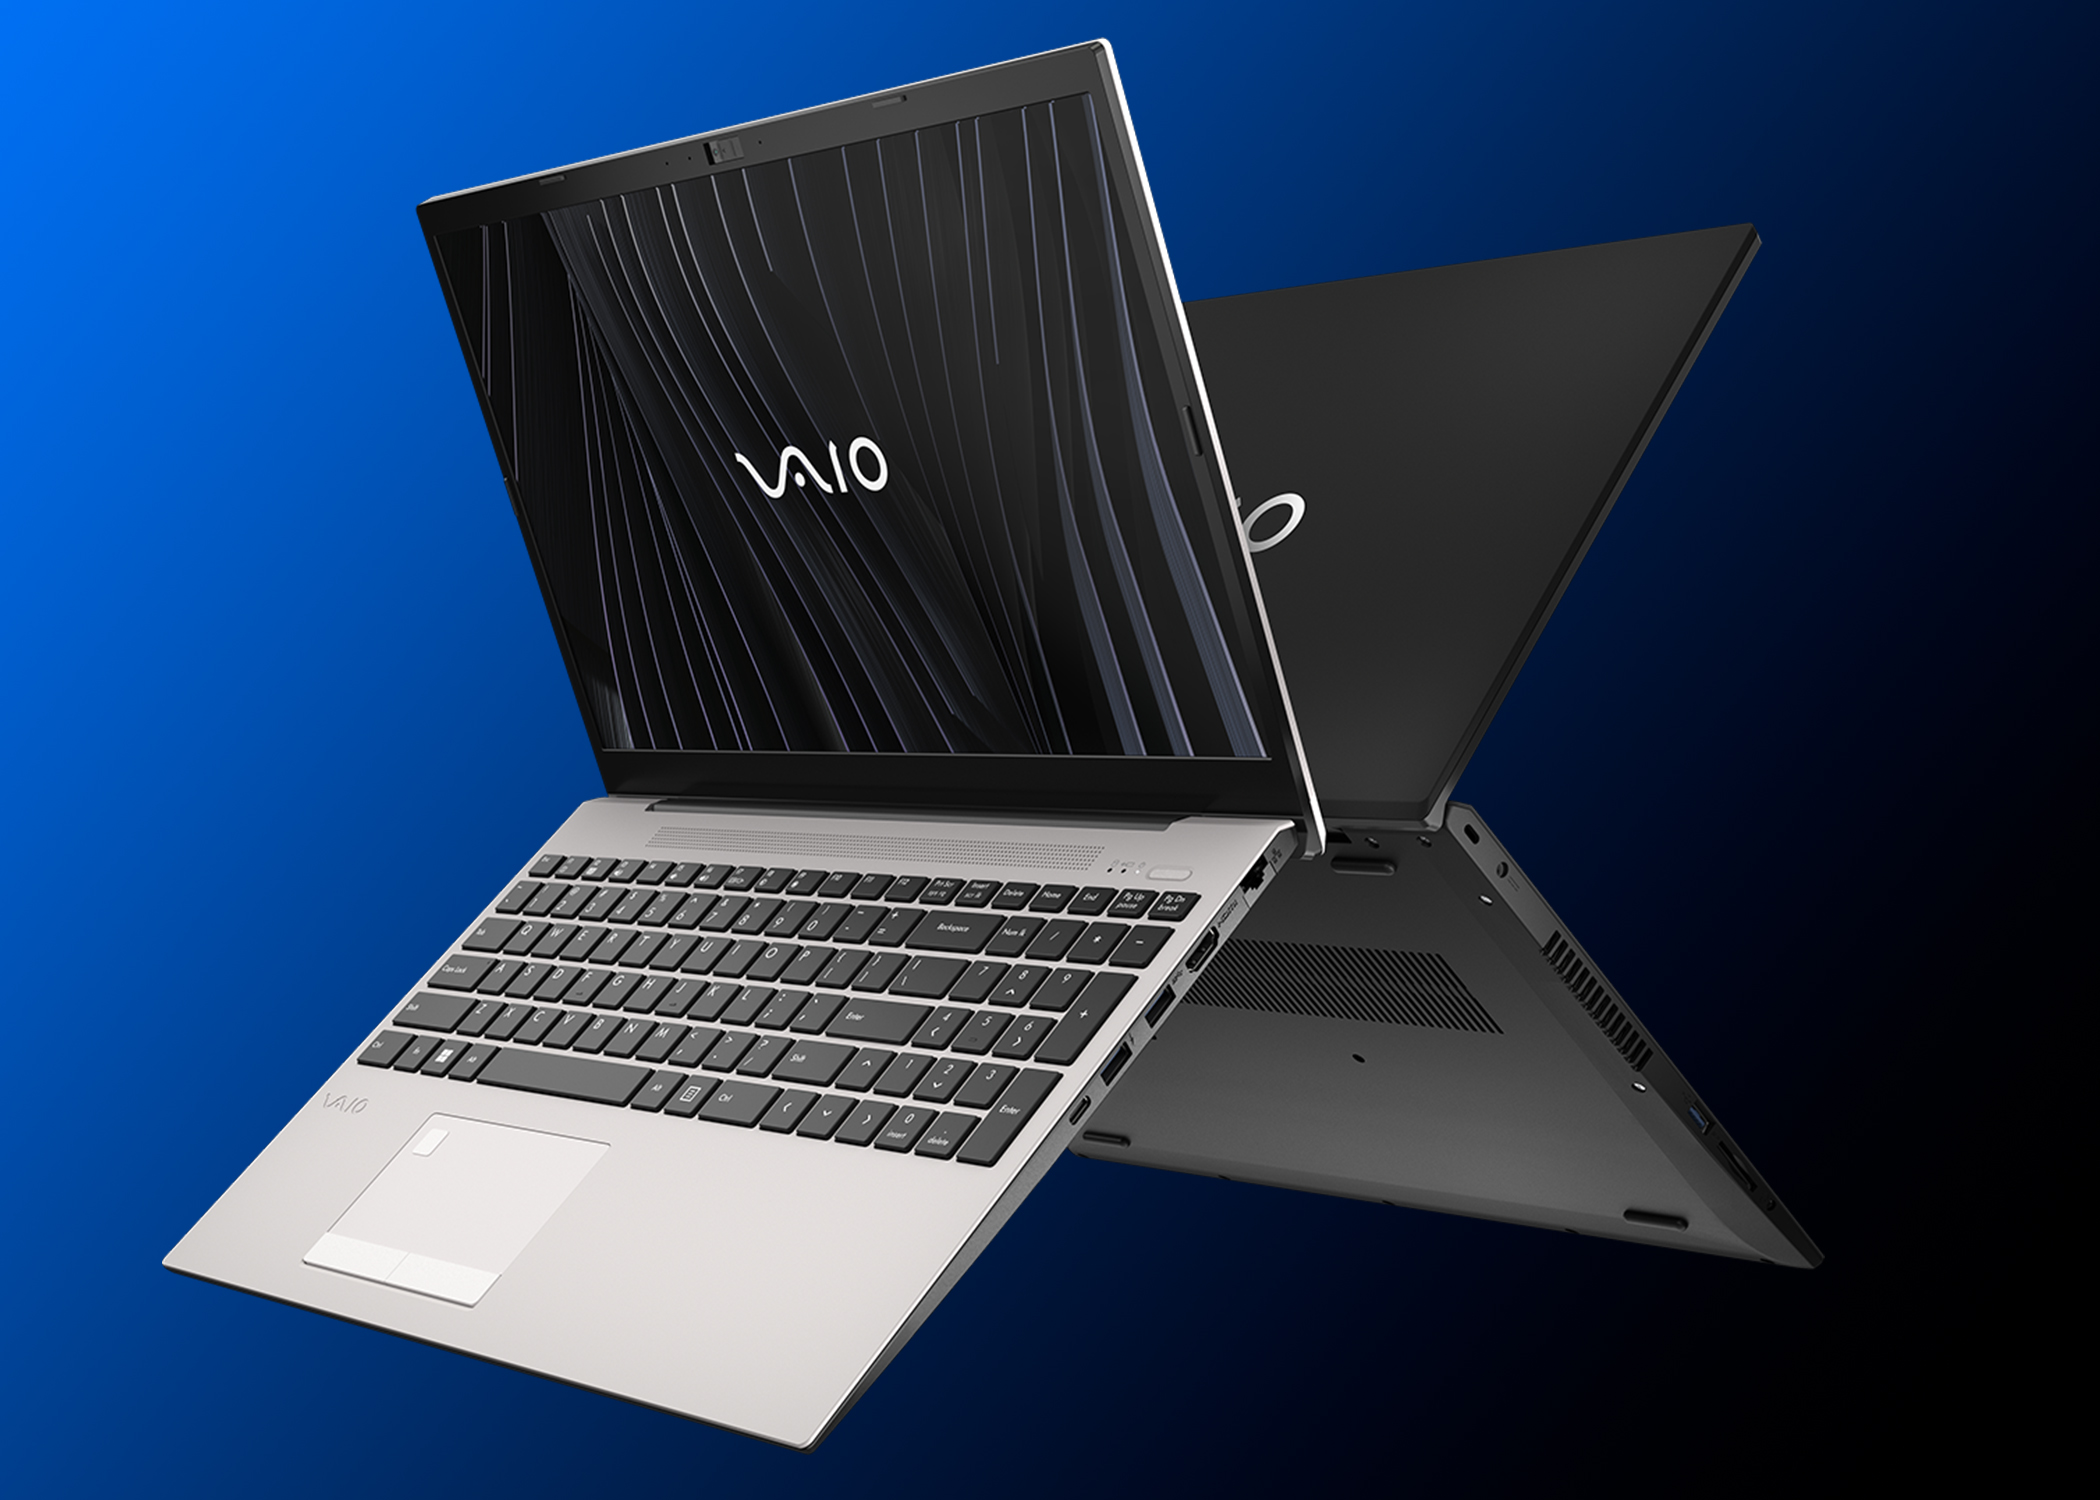 VAIO laptops on a blue and black background